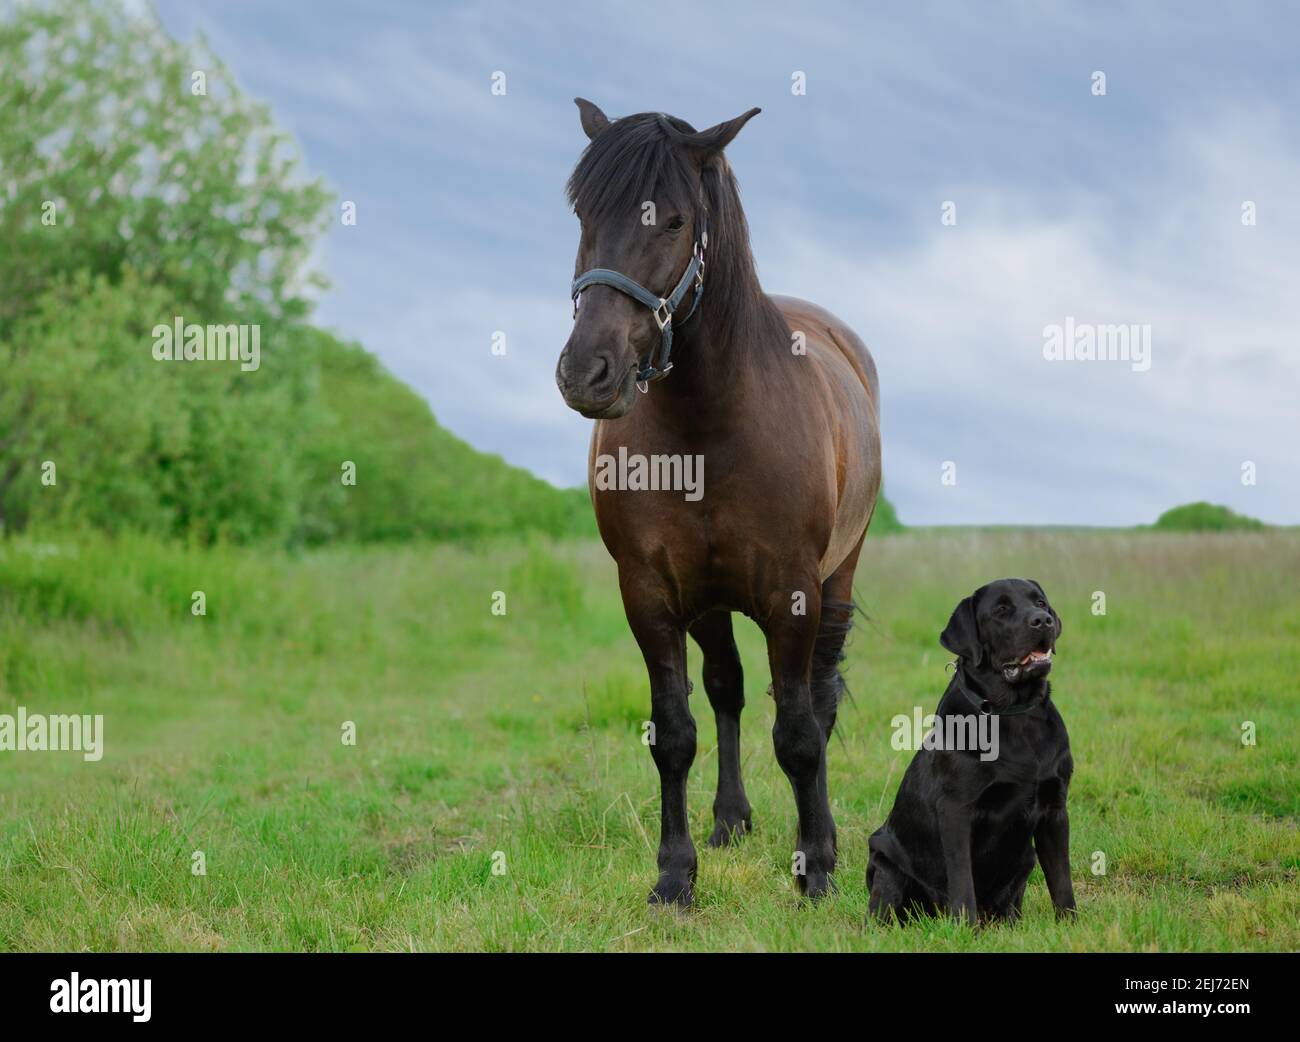 Adult bay horse and black dog are on the grass in countryside. Stock Photo